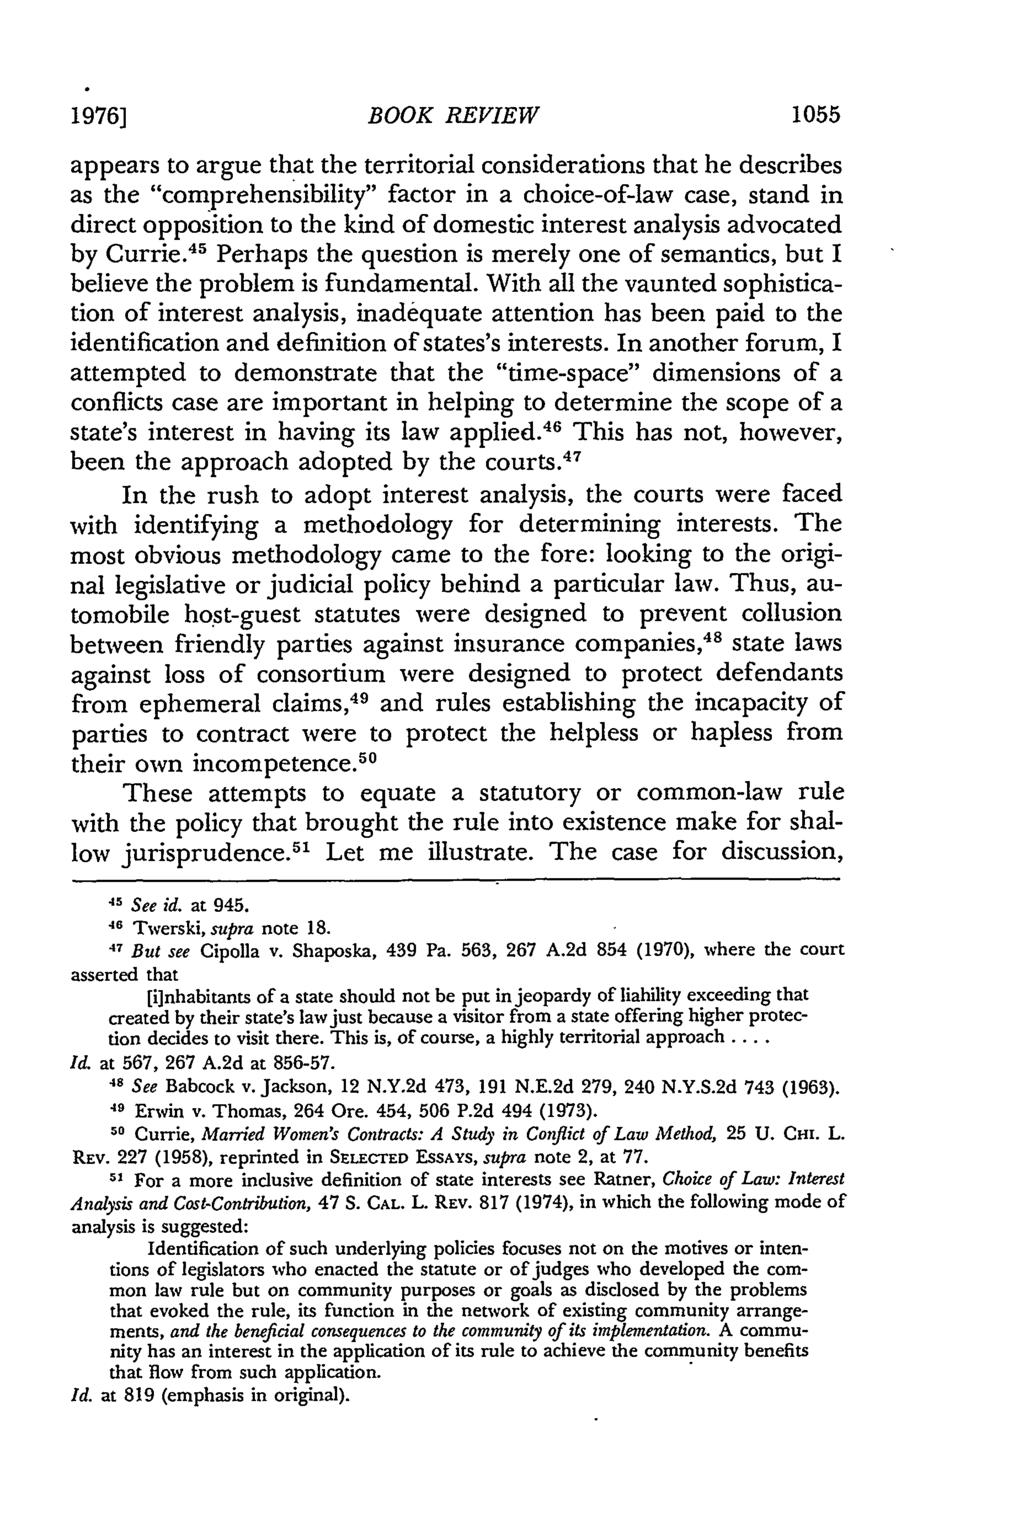 1976] BOOK REVIEW appears to argue that the territorial considerations that he describes as the "comprehensibility" factor in a choice-of-law case, stand in direct opposition to the kind of domestic